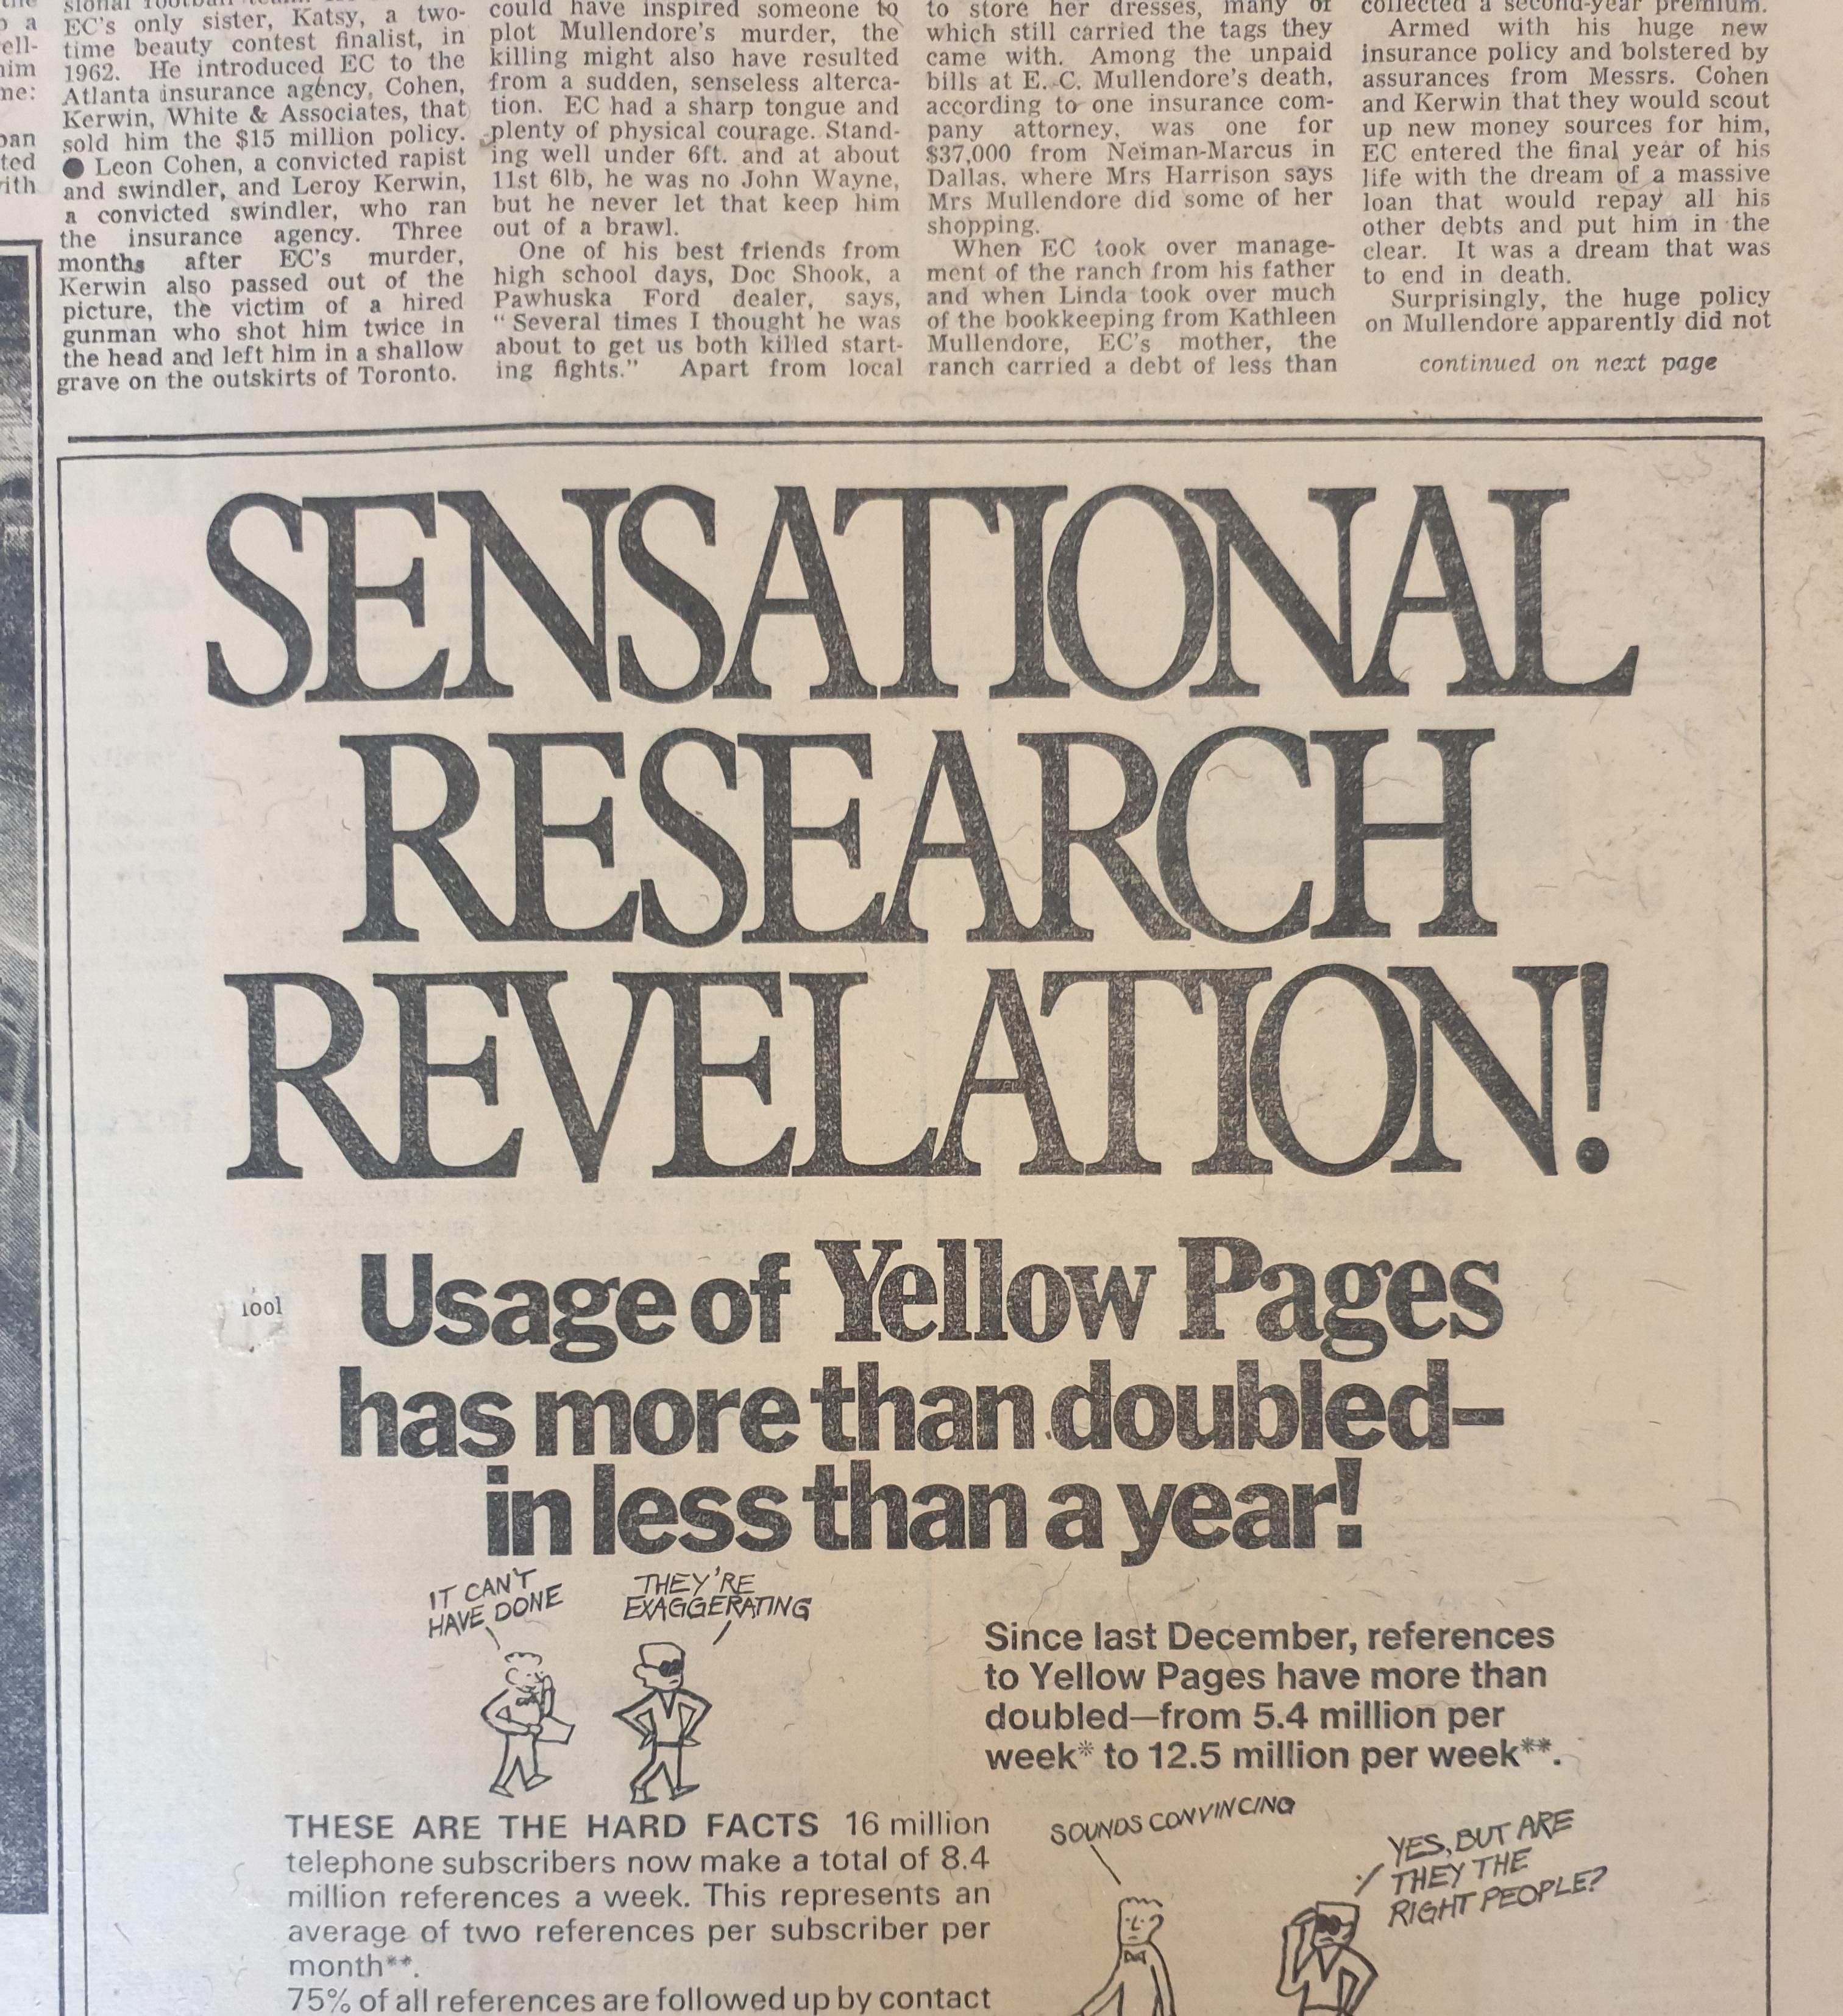 newspaper - Sensational Research Revelation! Usage of Yellow Pages has more than doubled in less than a year! Me Since last December, references to Yellow Pages have more than doubled from 5.4 million per week to 12.5 million per week These Are The Hard F